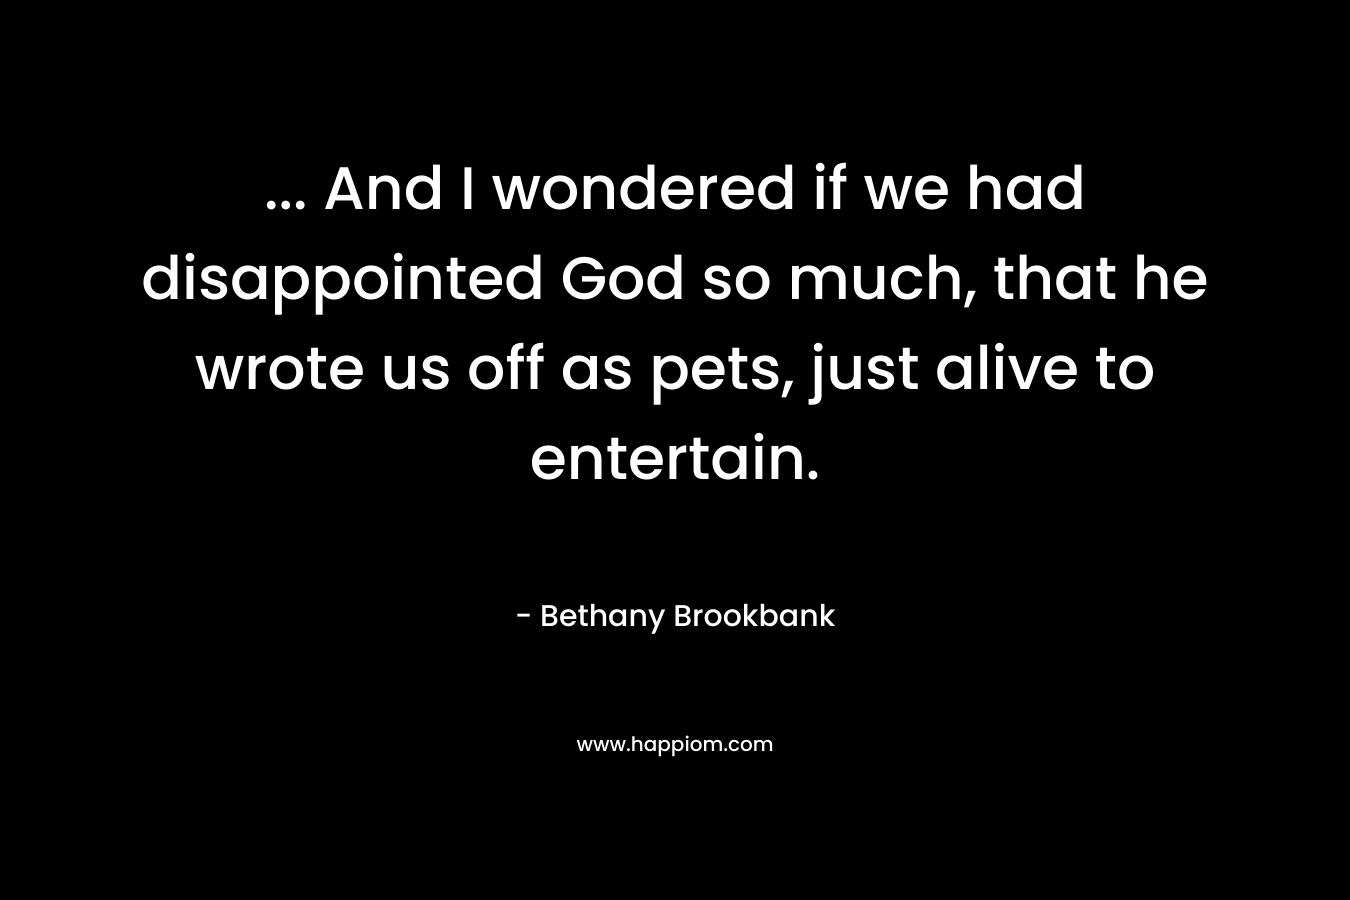 … And I wondered if we had disappointed God so much, that he wrote us off as pets, just alive to entertain. – Bethany Brookbank